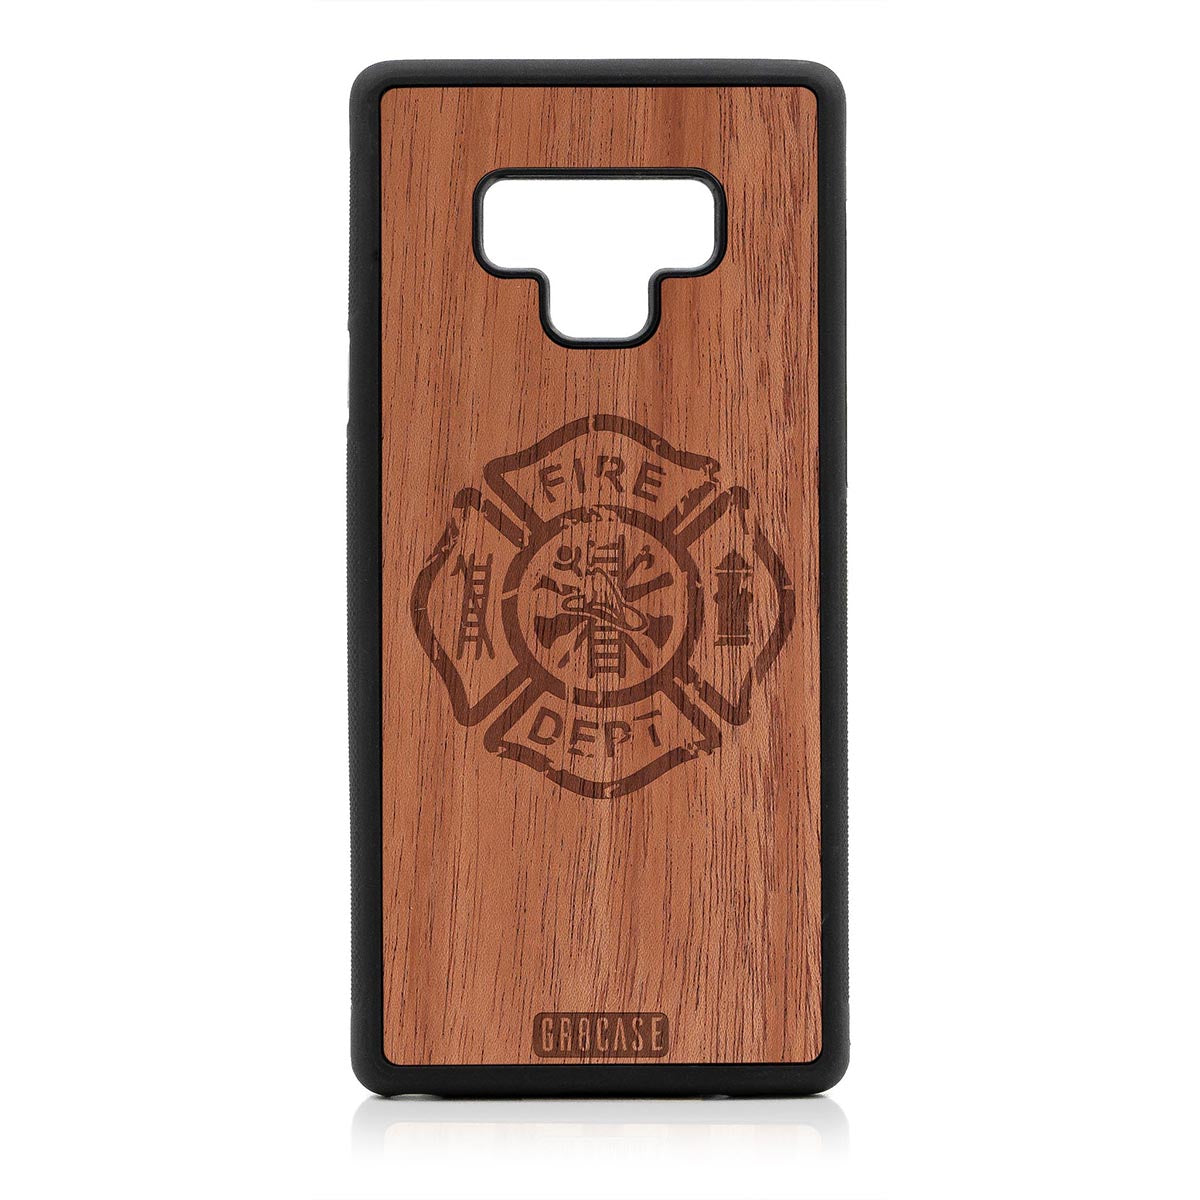 Fire Department Design Wood Case Samsung Galaxy Note 9 by GR8CASE